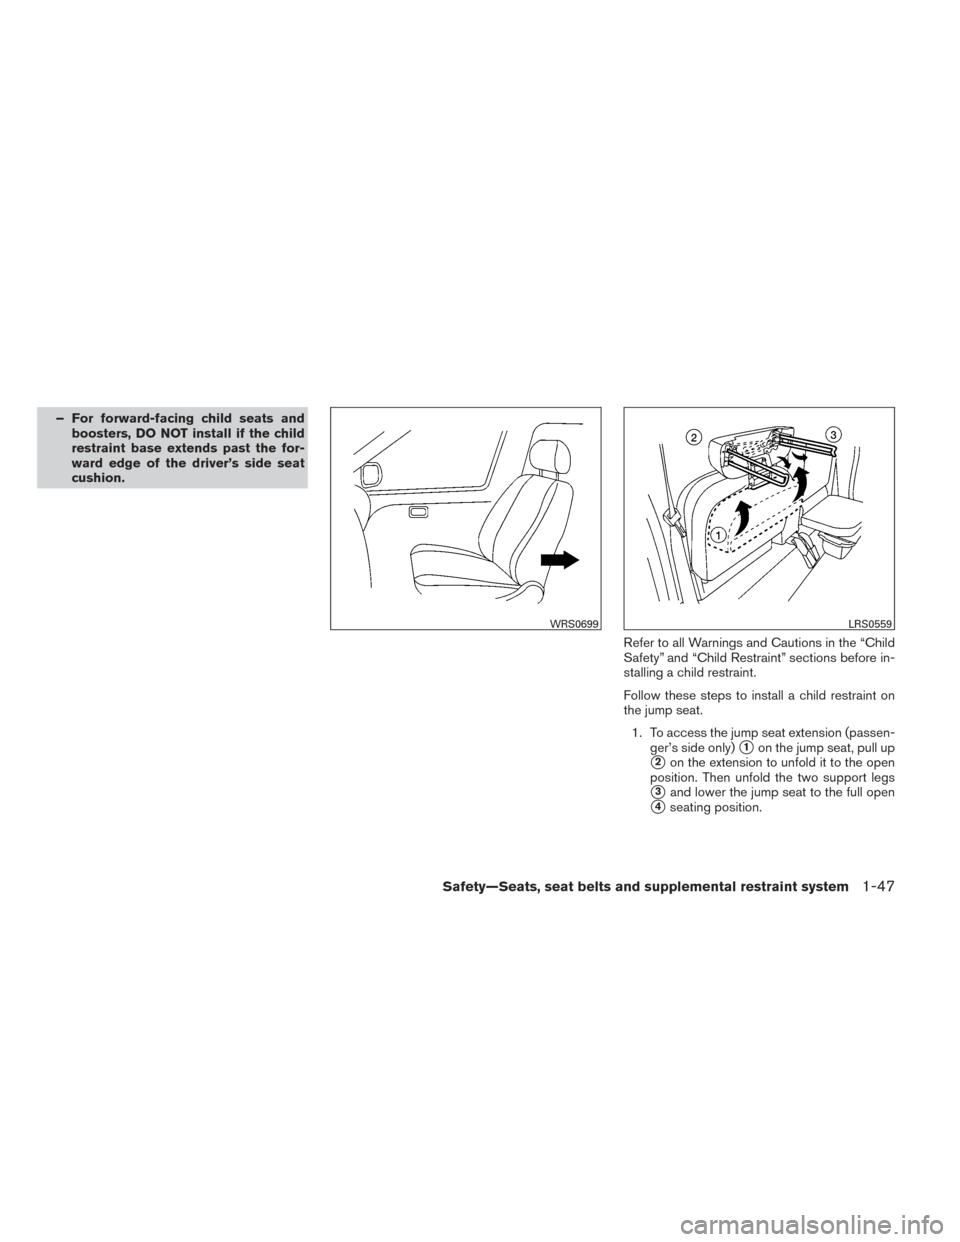 NISSAN FRONTIER 2014 D23 / 3.G Repair Manual – For forward-facing child seats andboosters, DO NOT install if the child
restraint base extends past the for-
ward edge of the driver’s side seat
cushion.
Refer to all Warnings and Cautions in th